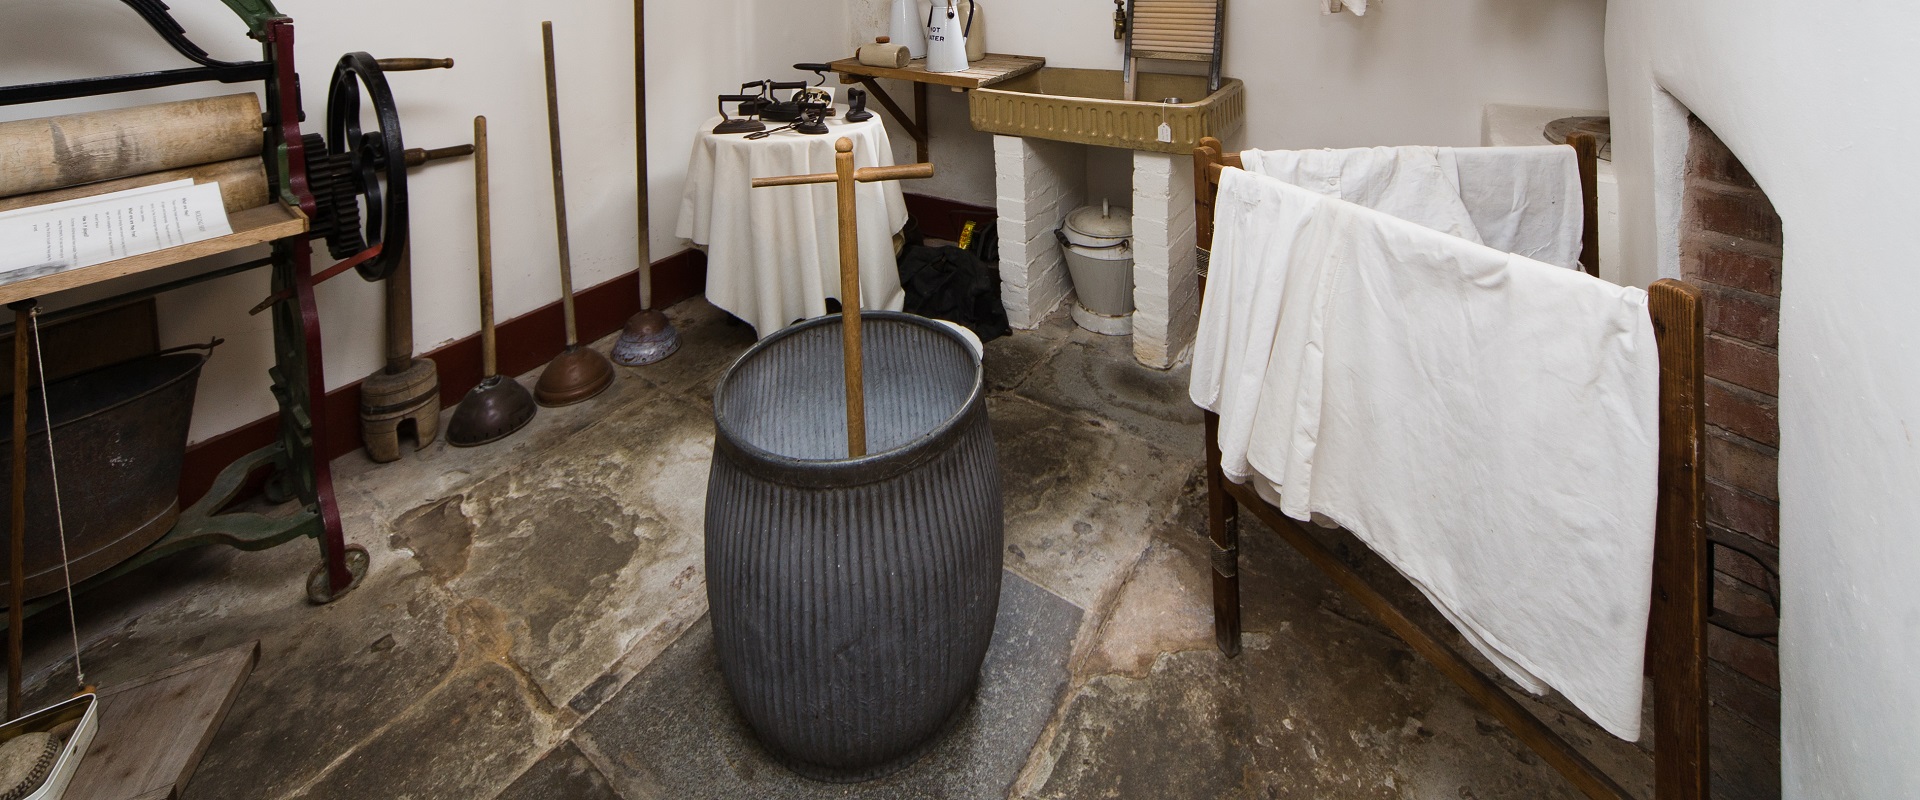 The Scullery and a Dolly tub in the Holst Victorian House